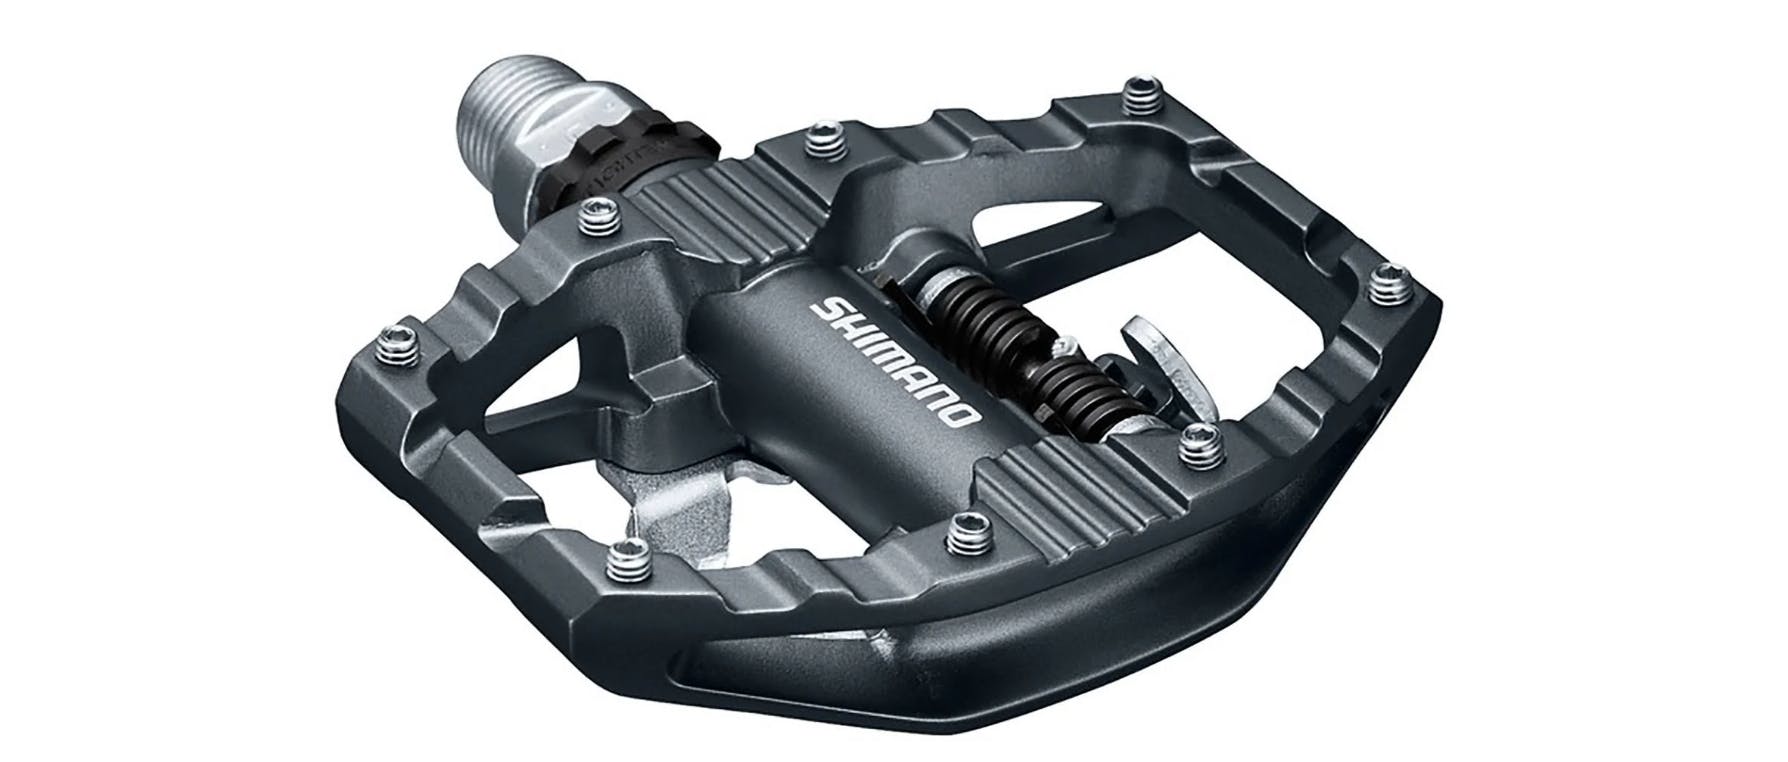 The Shimano PD-EH500 SPD pedal.